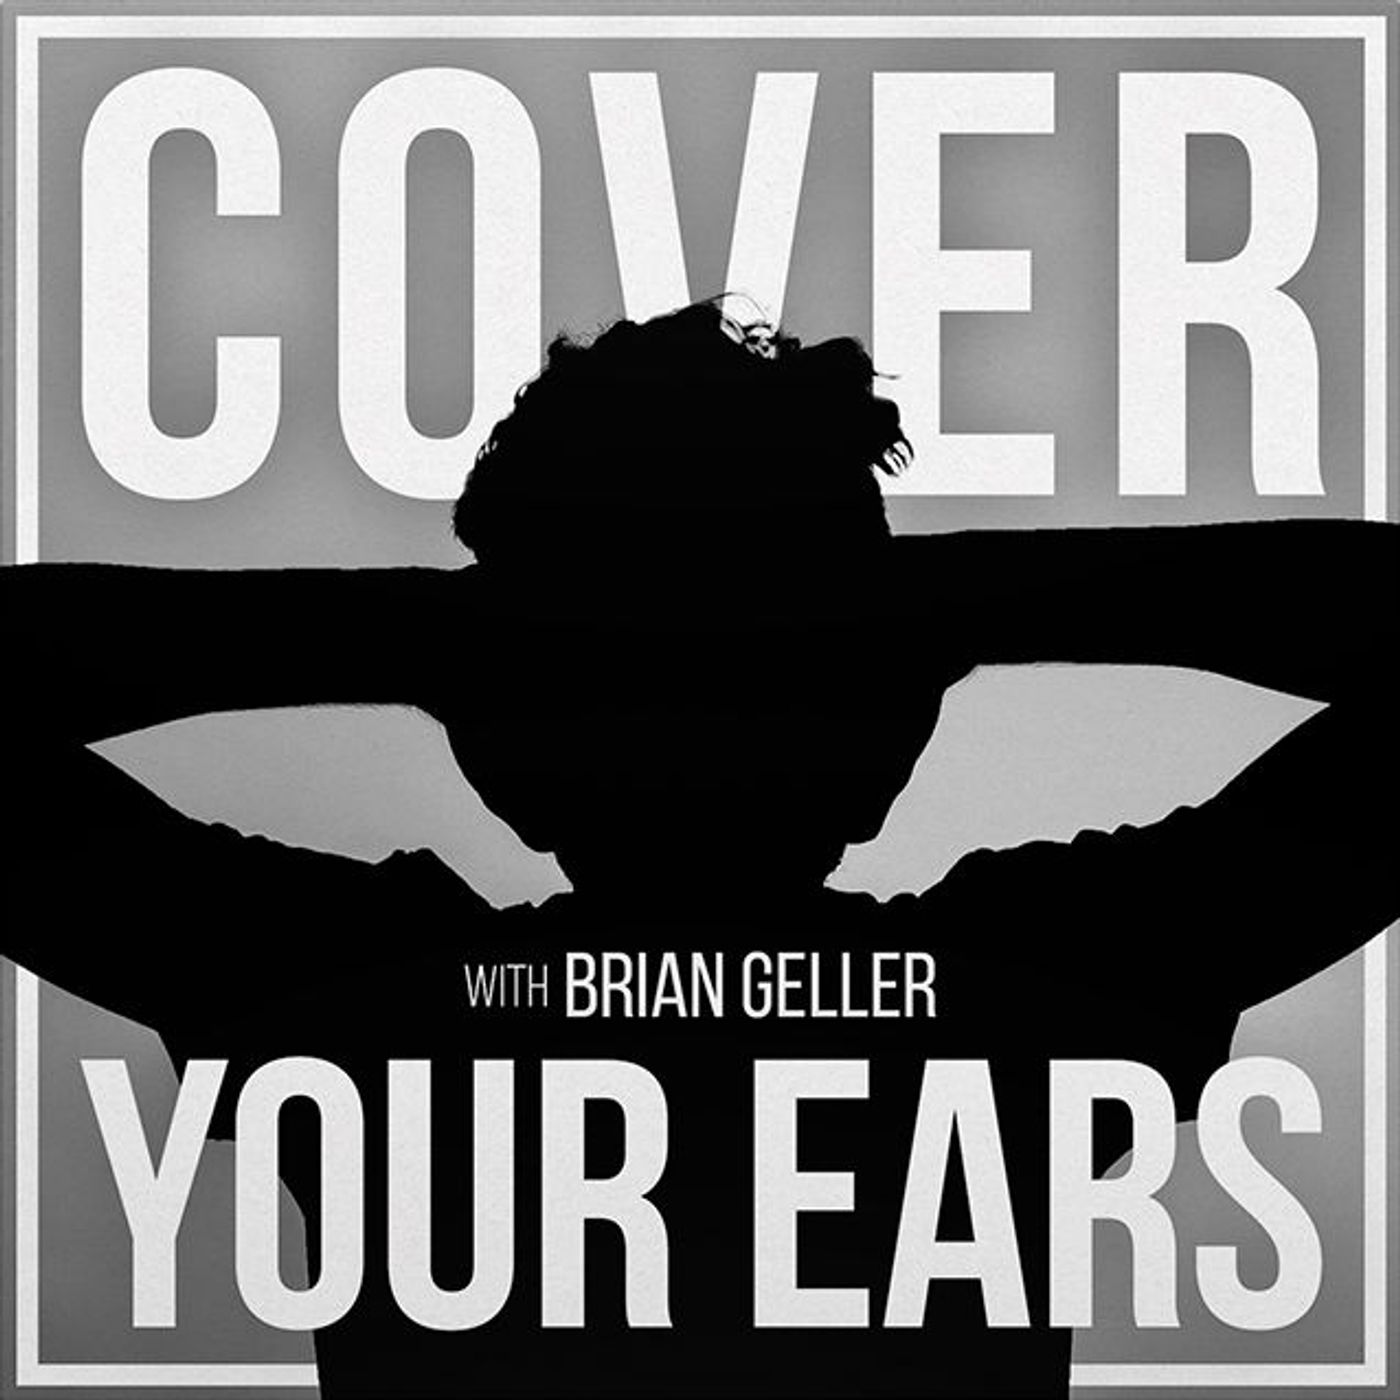 Cover Your Ears